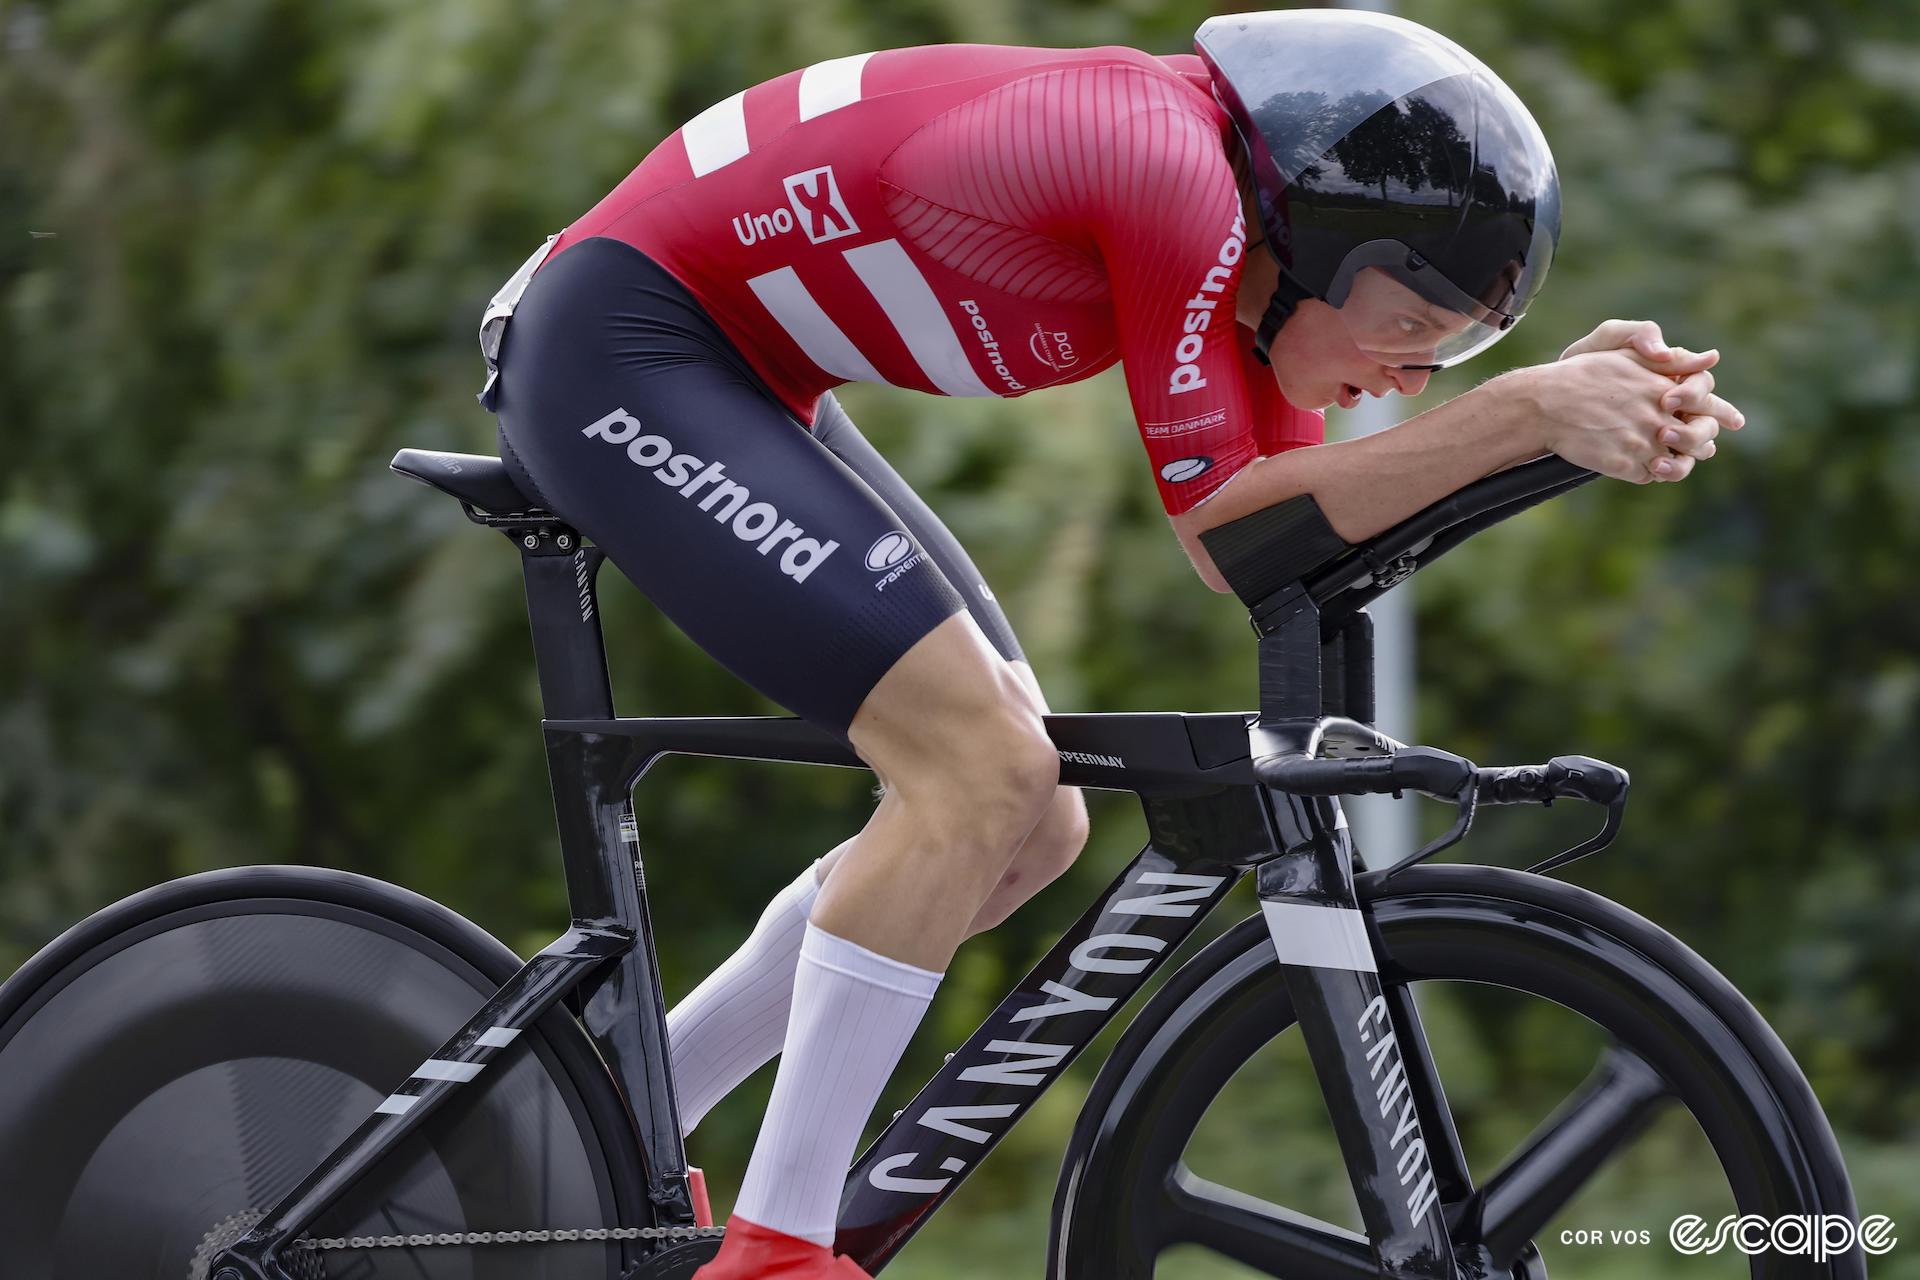 A cyclist rides a time trial in red and black kit with a black aero helmet and white socks.